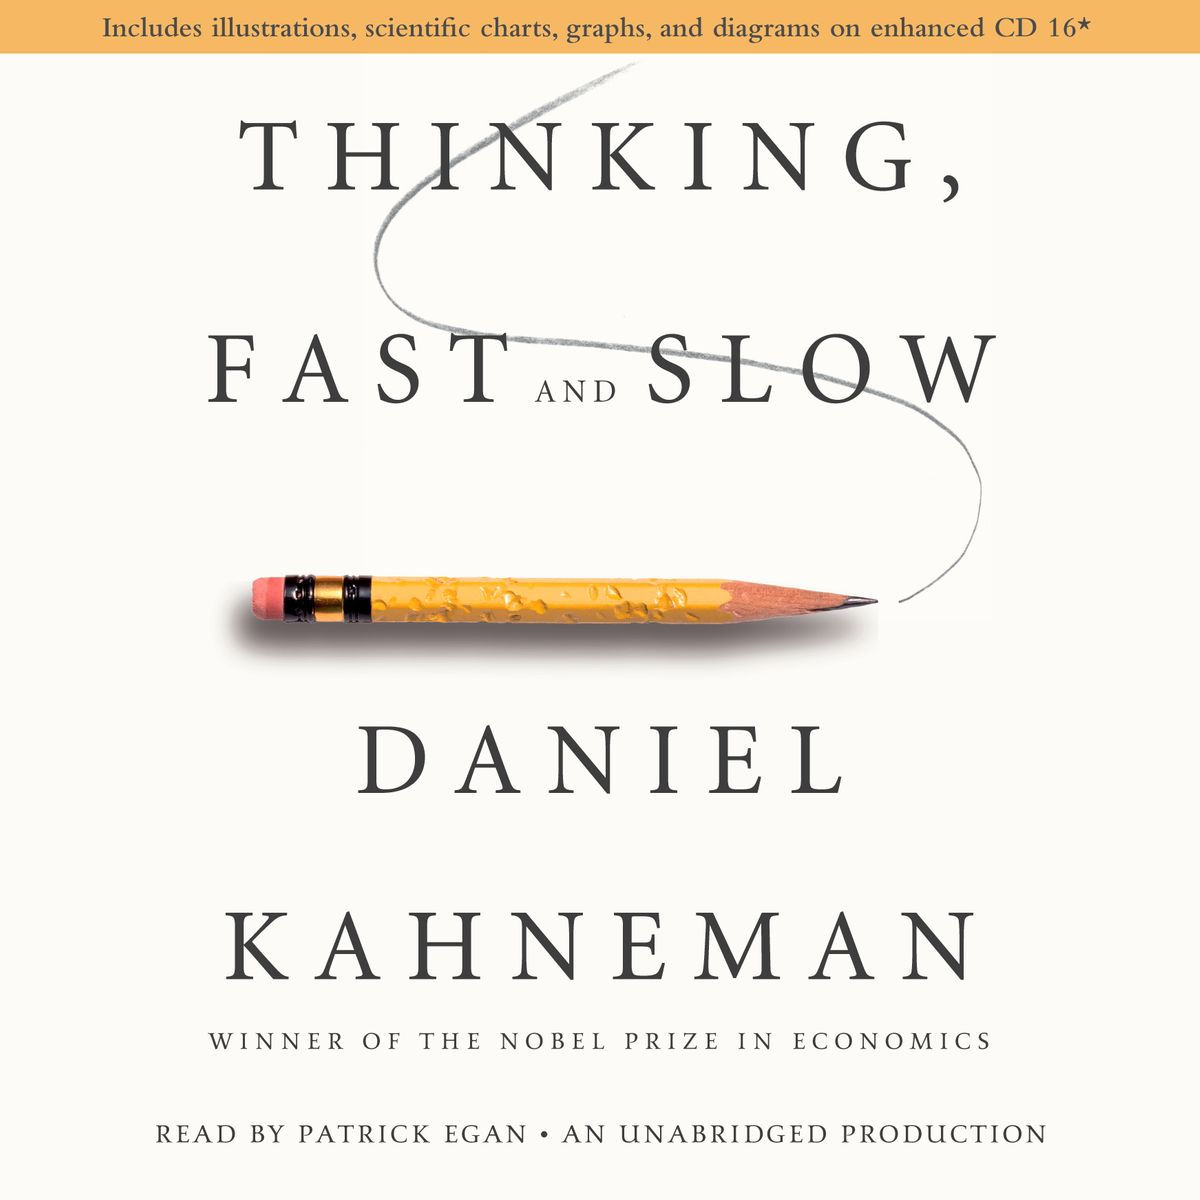 Thinking fast and slow book cover